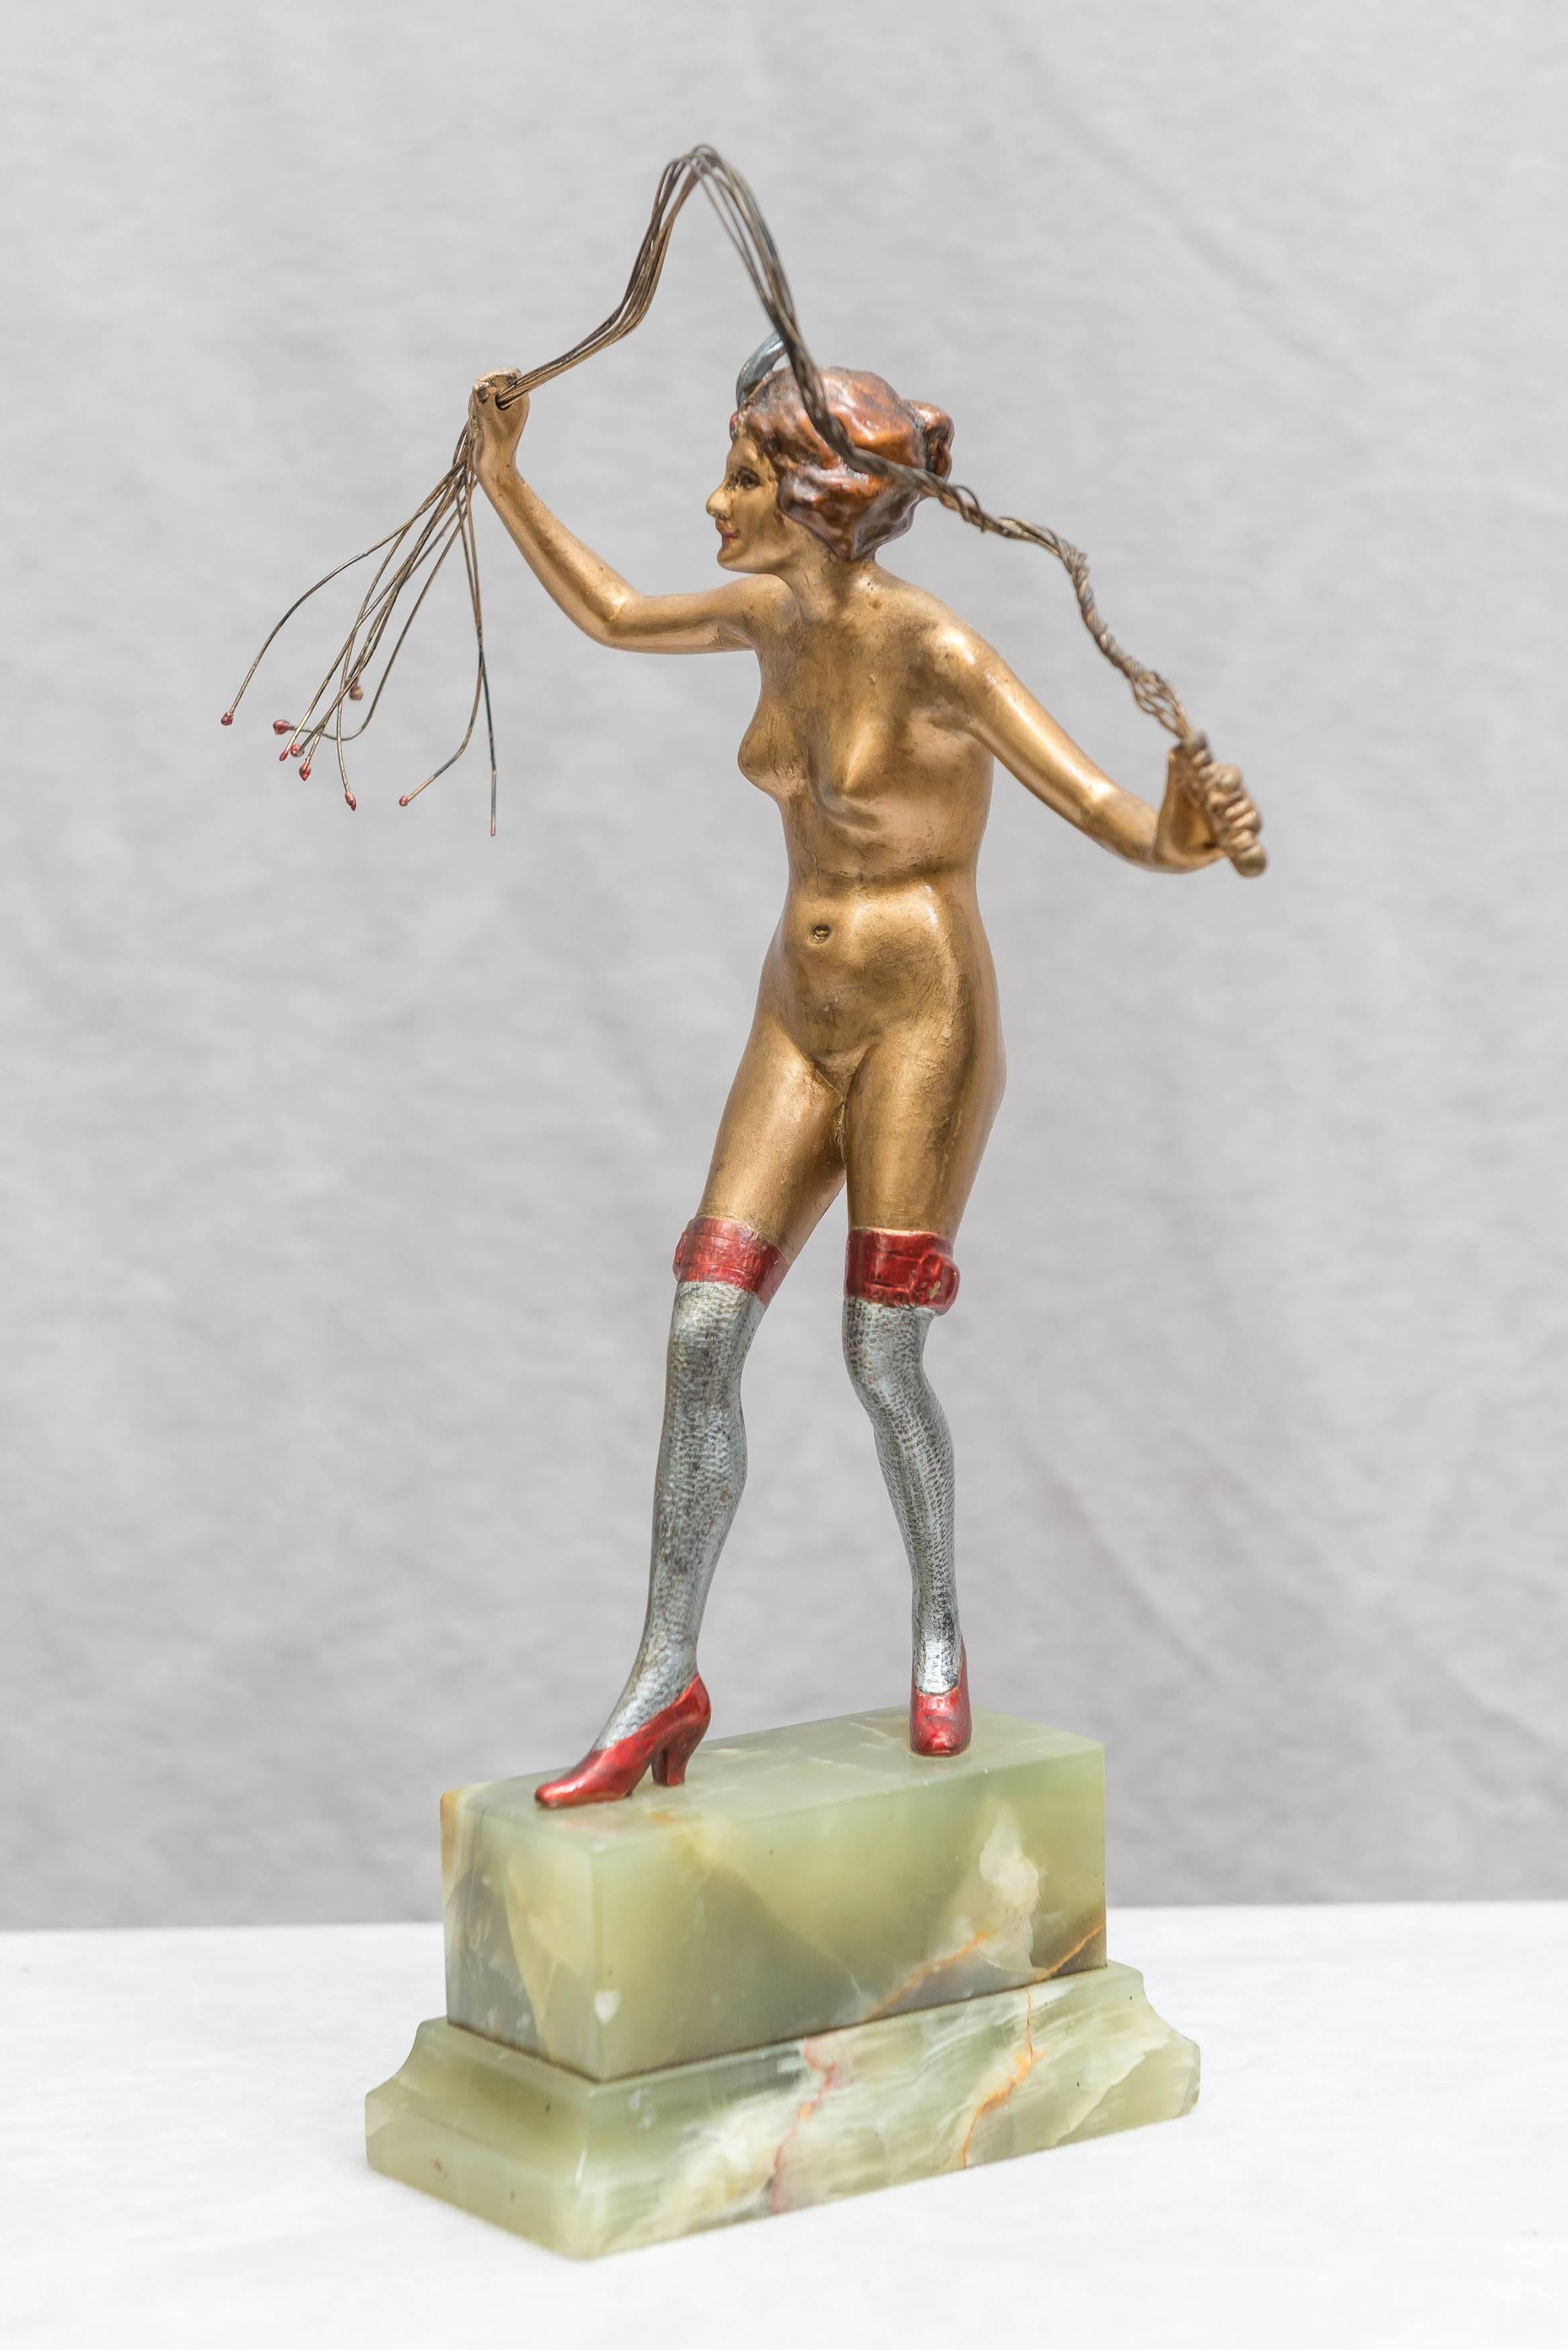 Cold-Painted Art Deco Austrian Bronze Figure of a Nude Woman with Cat O' Nine Tails Whip